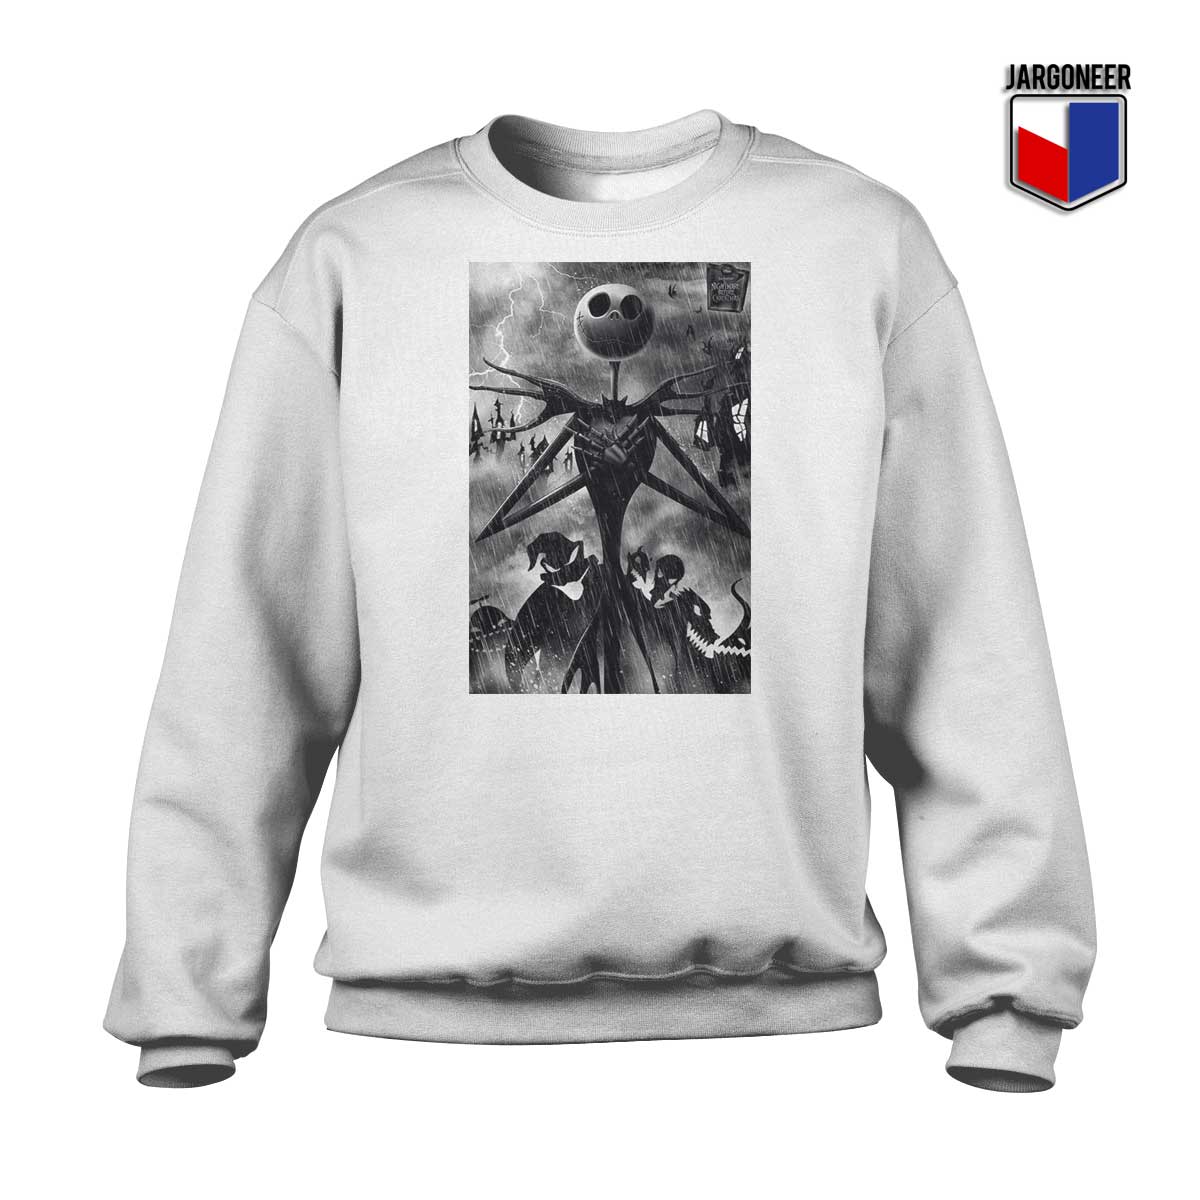 The Nightmare Before Christmas White Sweatshirt - Shop Unique Graphic Cool Shirt Designs